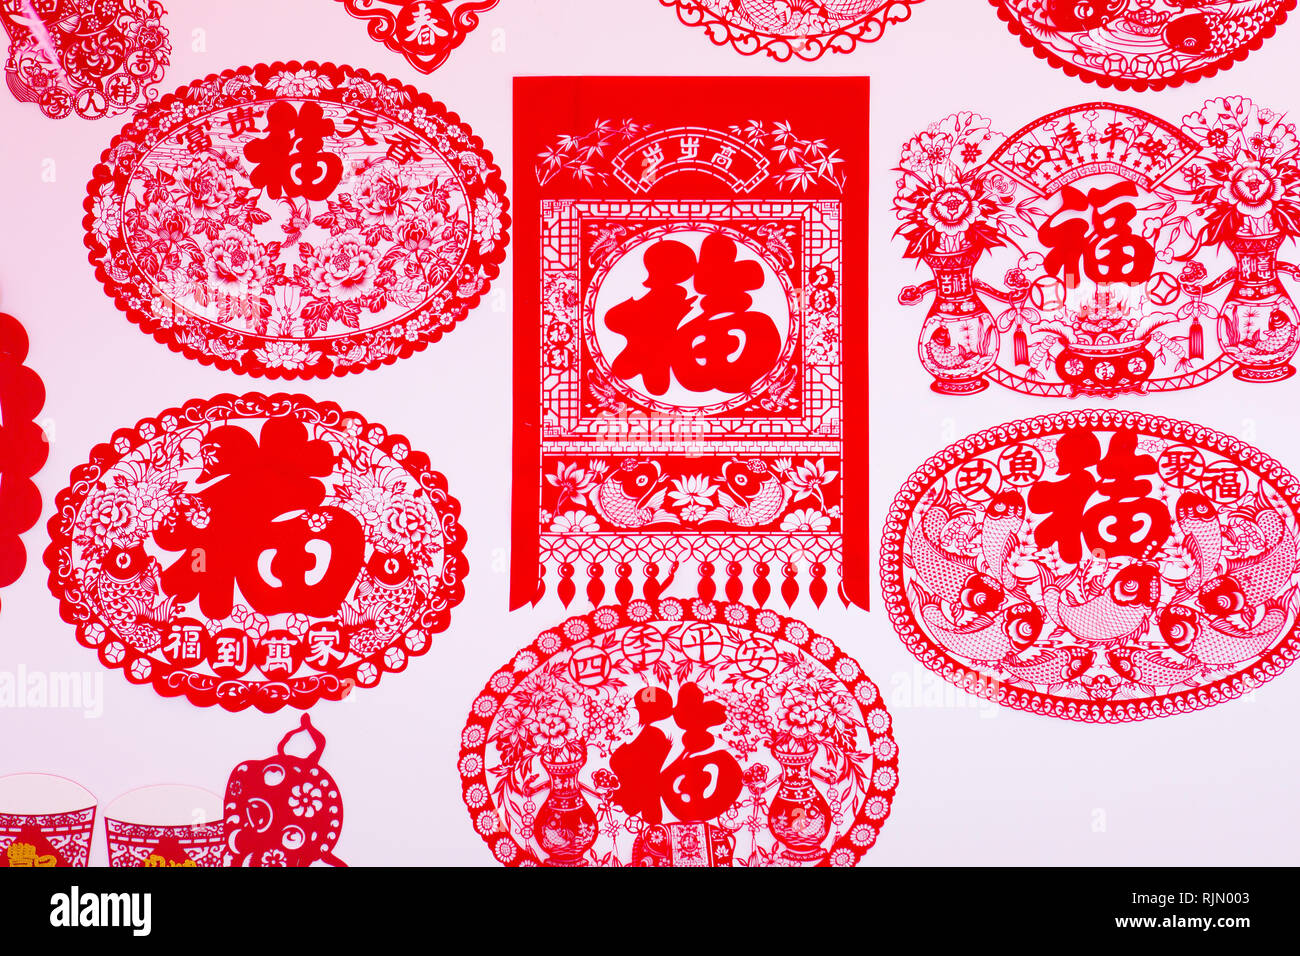 Chinese New Year decoration design with the Chinese character 福 (Fu) in it. A single character meanings of good fortune, happiness and luck. Stock Photo